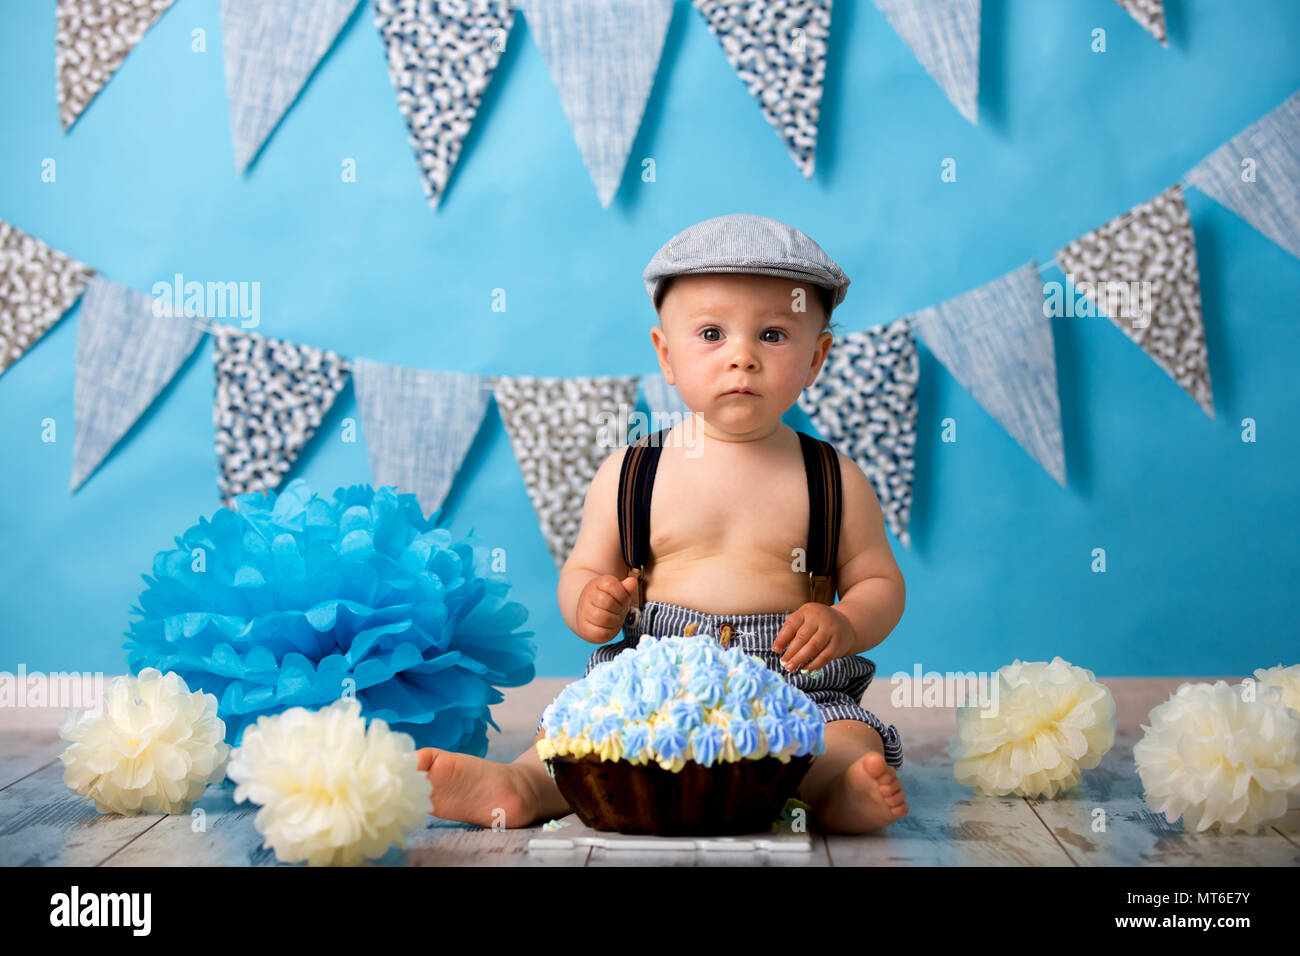 Premium Photo | Baby boy playing with a cake during cake smash birthday  party